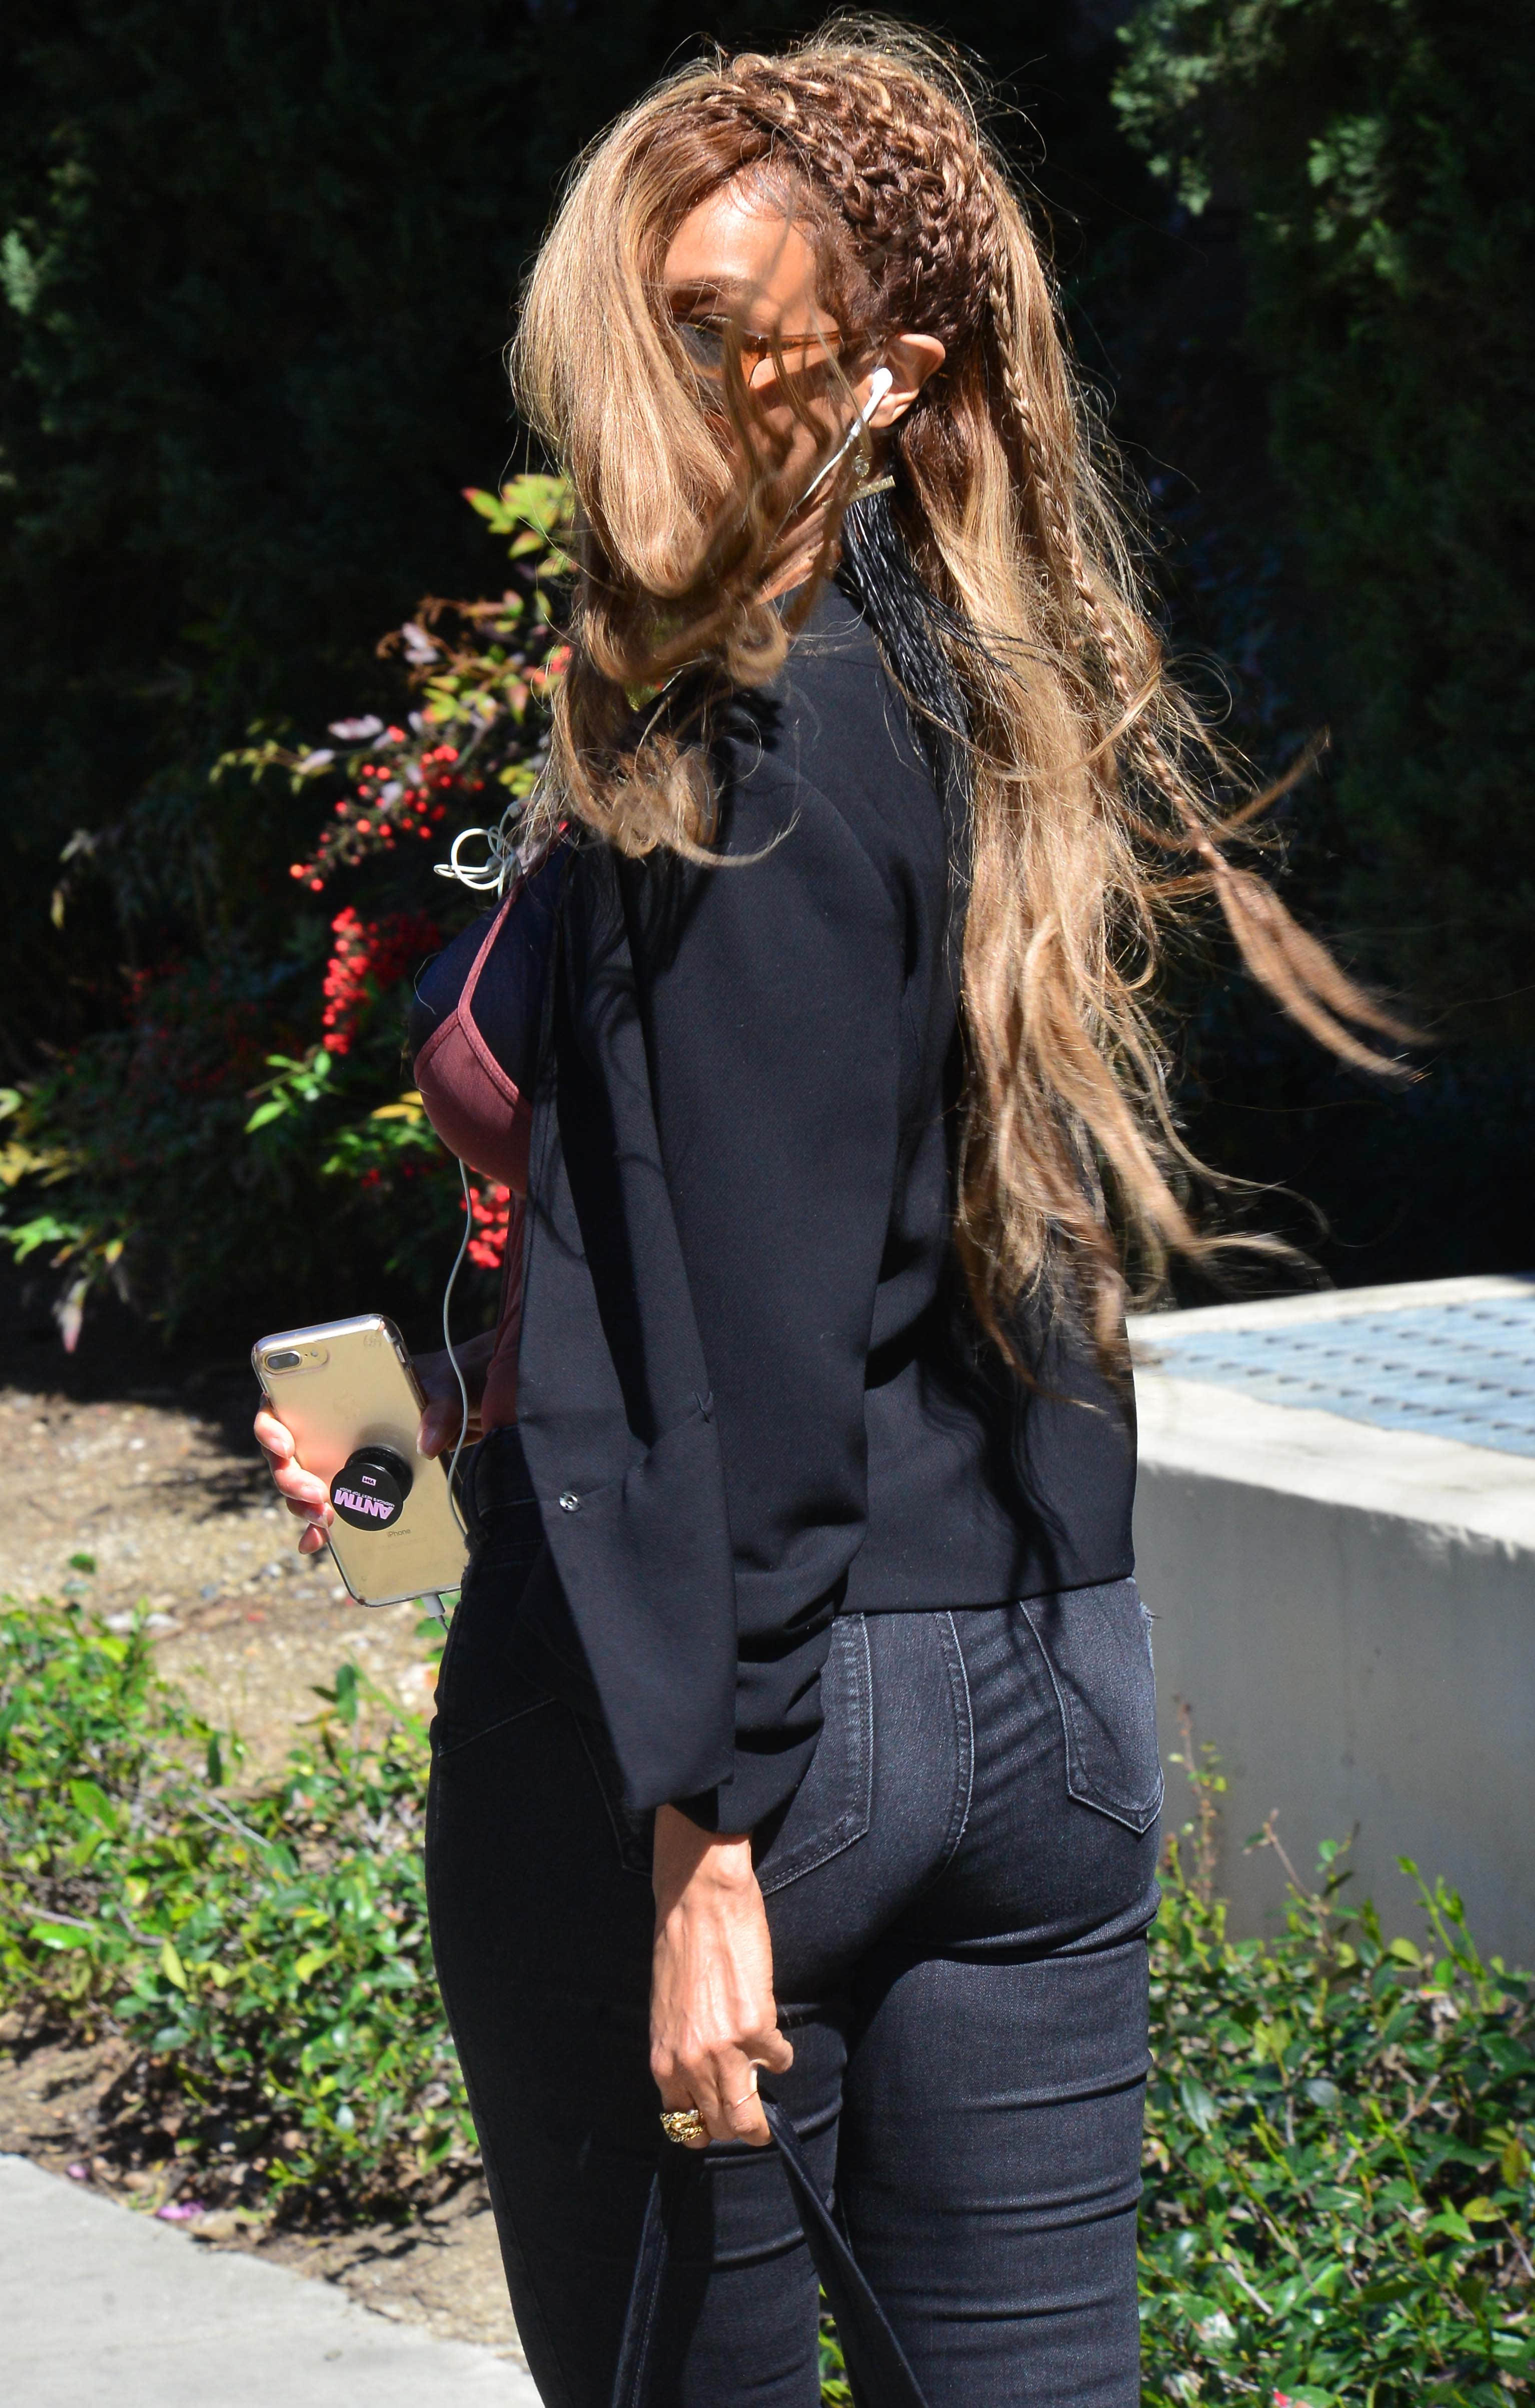 tyra-banks-out-in-beverly-hills-32718-1.jpg